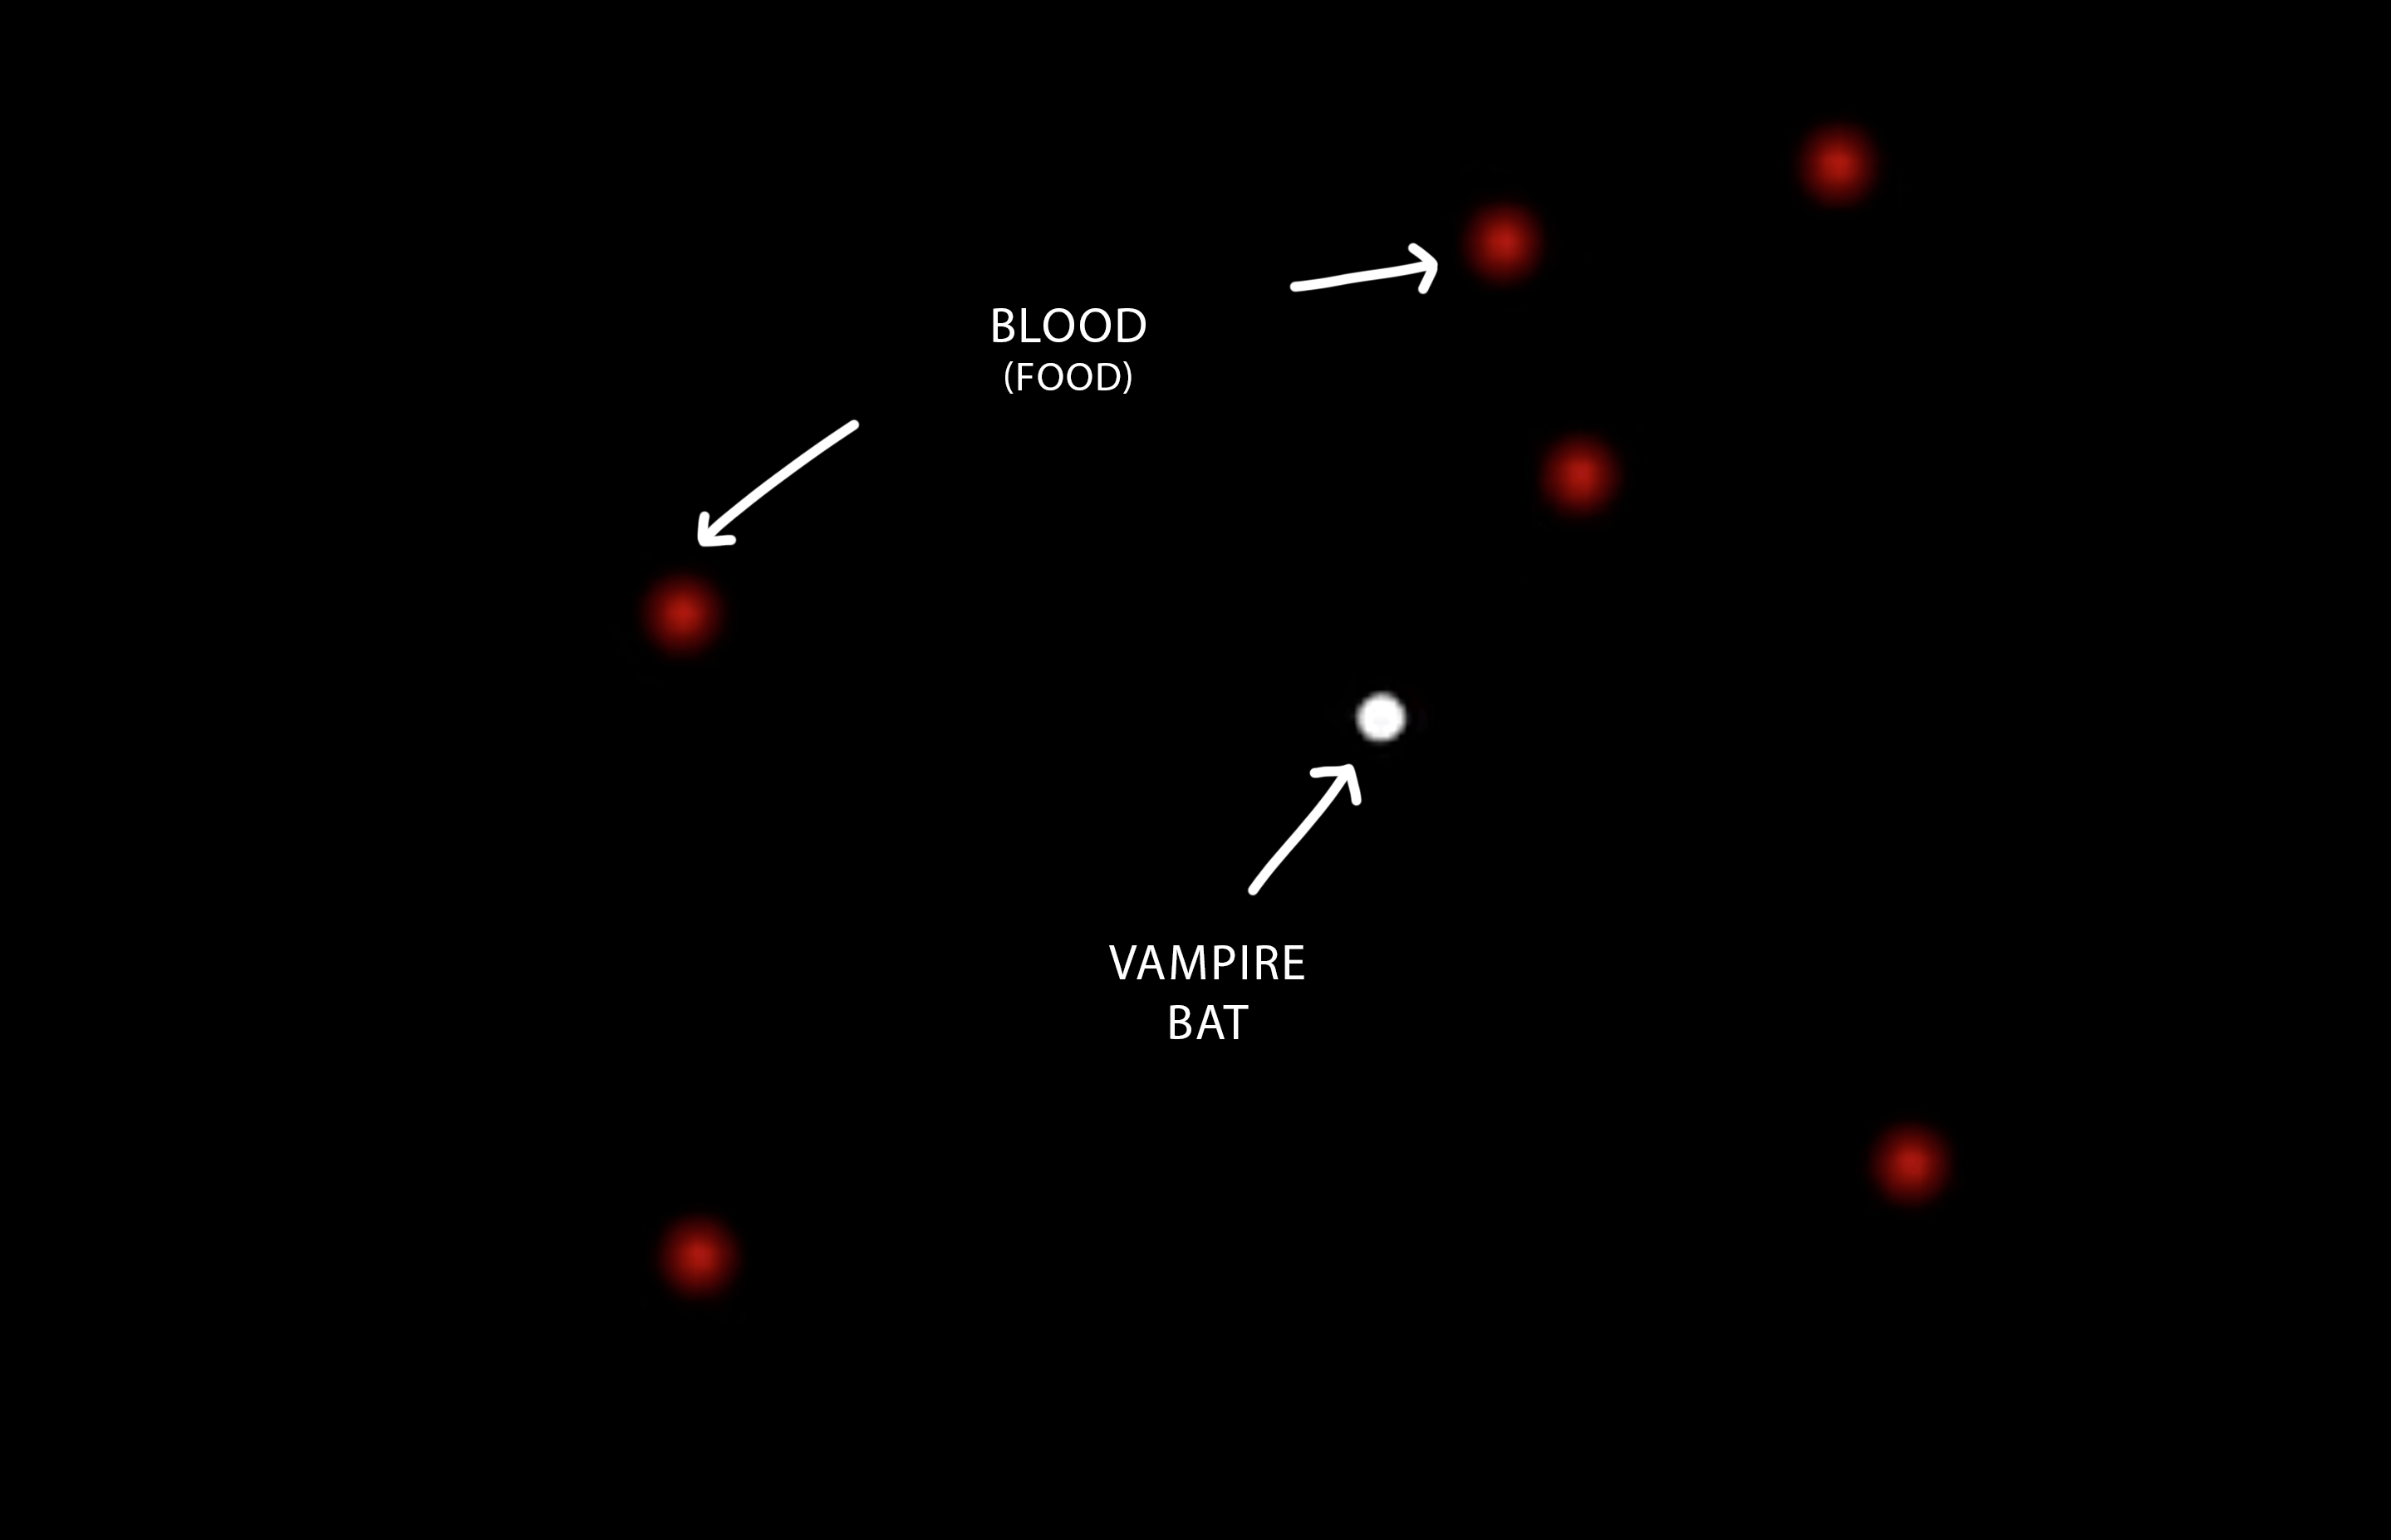 A Natural System showing Campire Bats and Blood